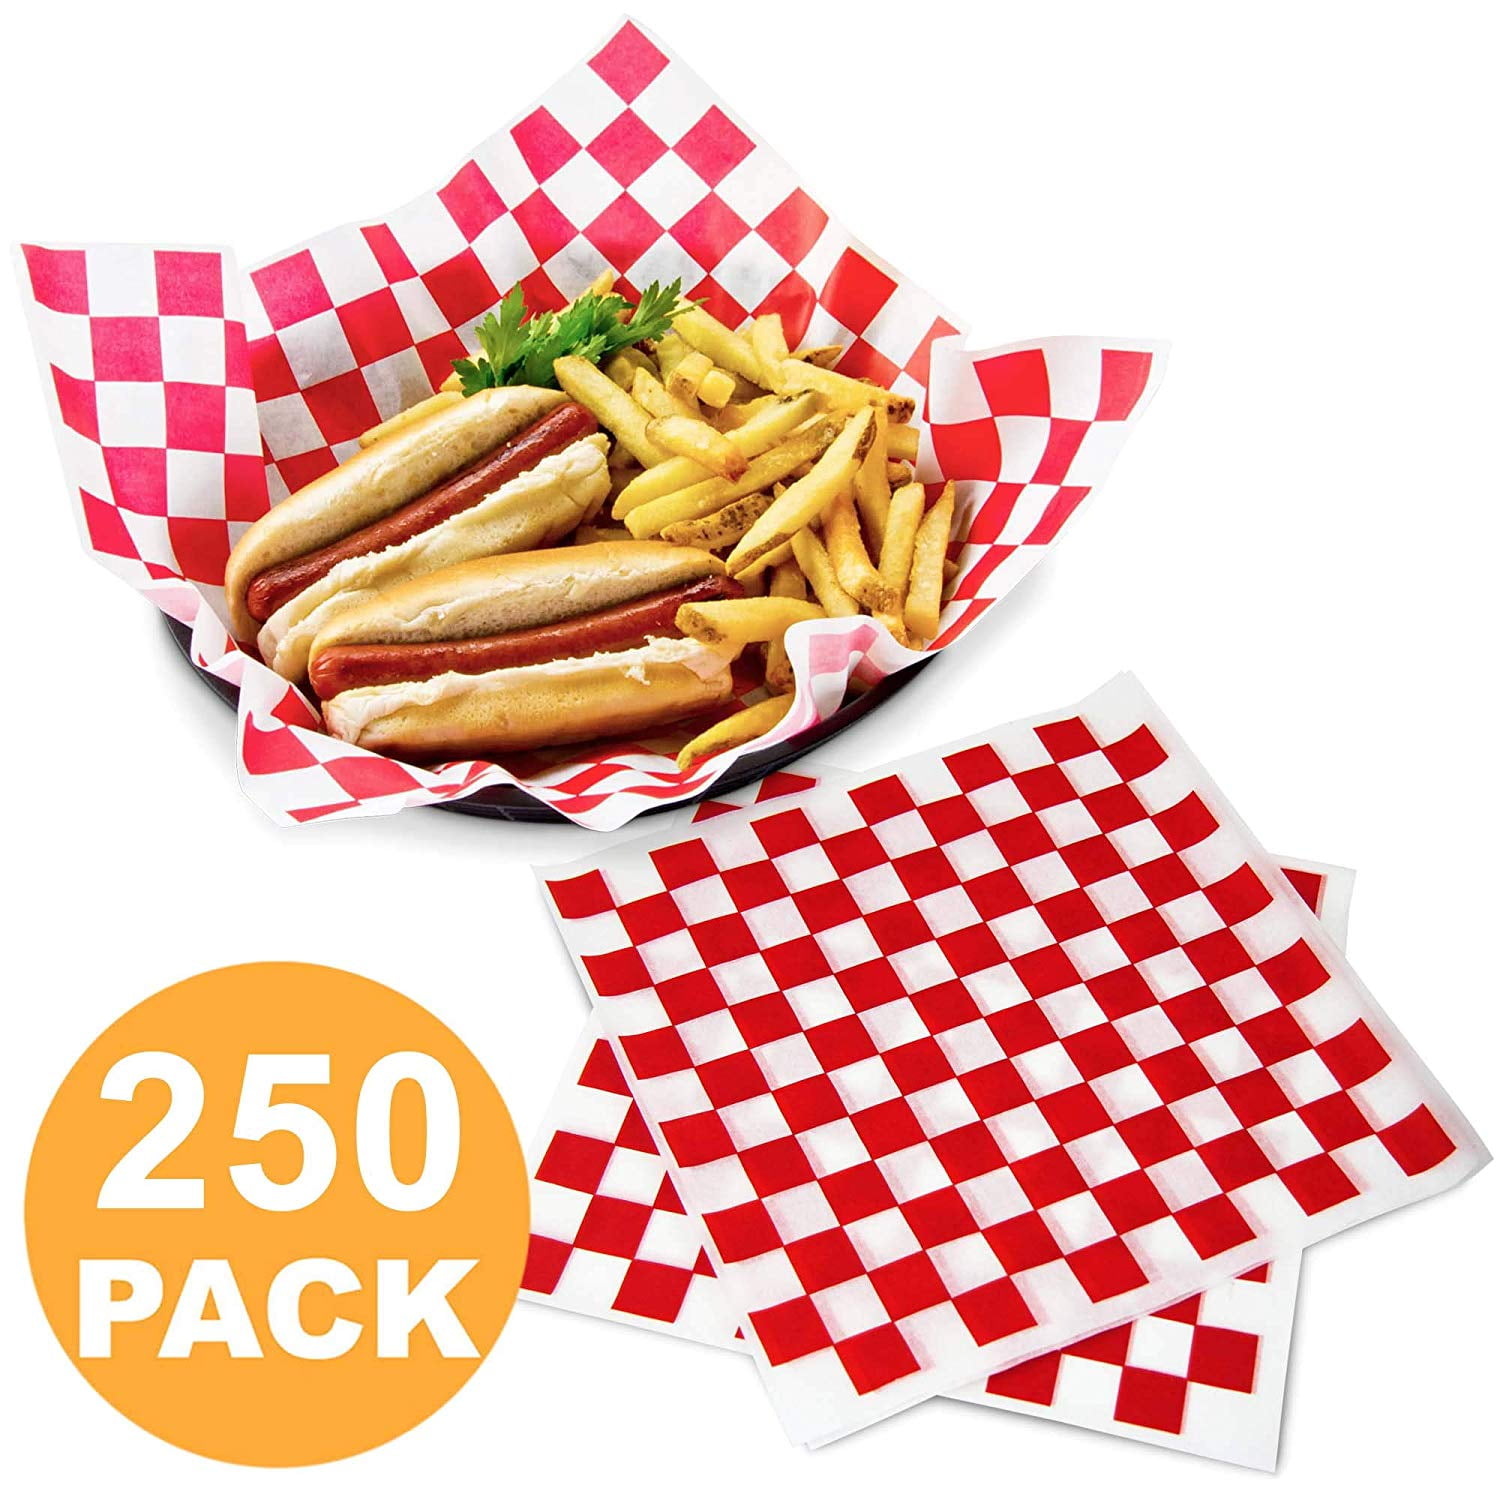 Food Wraps Free P&P Greaseproof Paper Burger Wraps Sheets Deli 